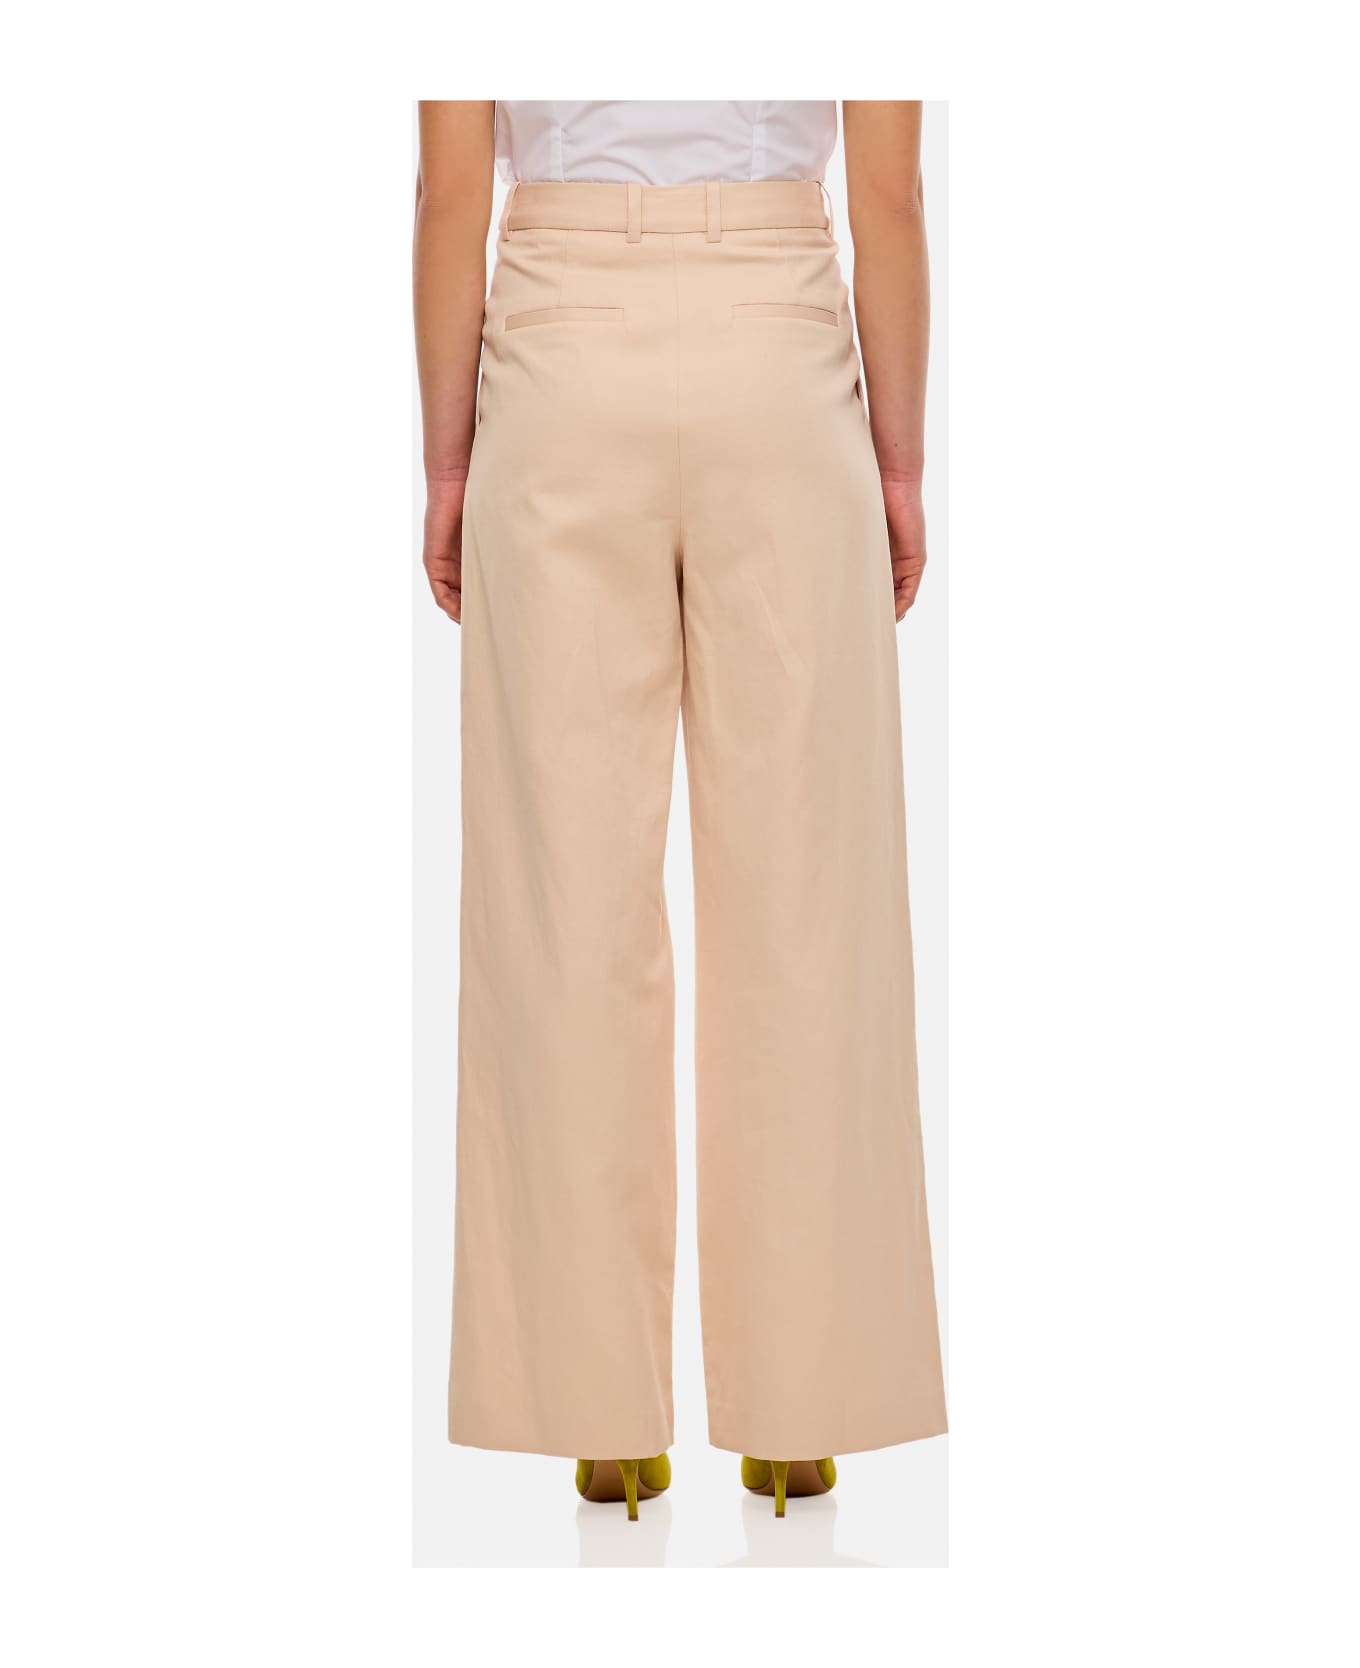 Loulou Studio Relaxed Cotton Linen Blend Pants - Pink